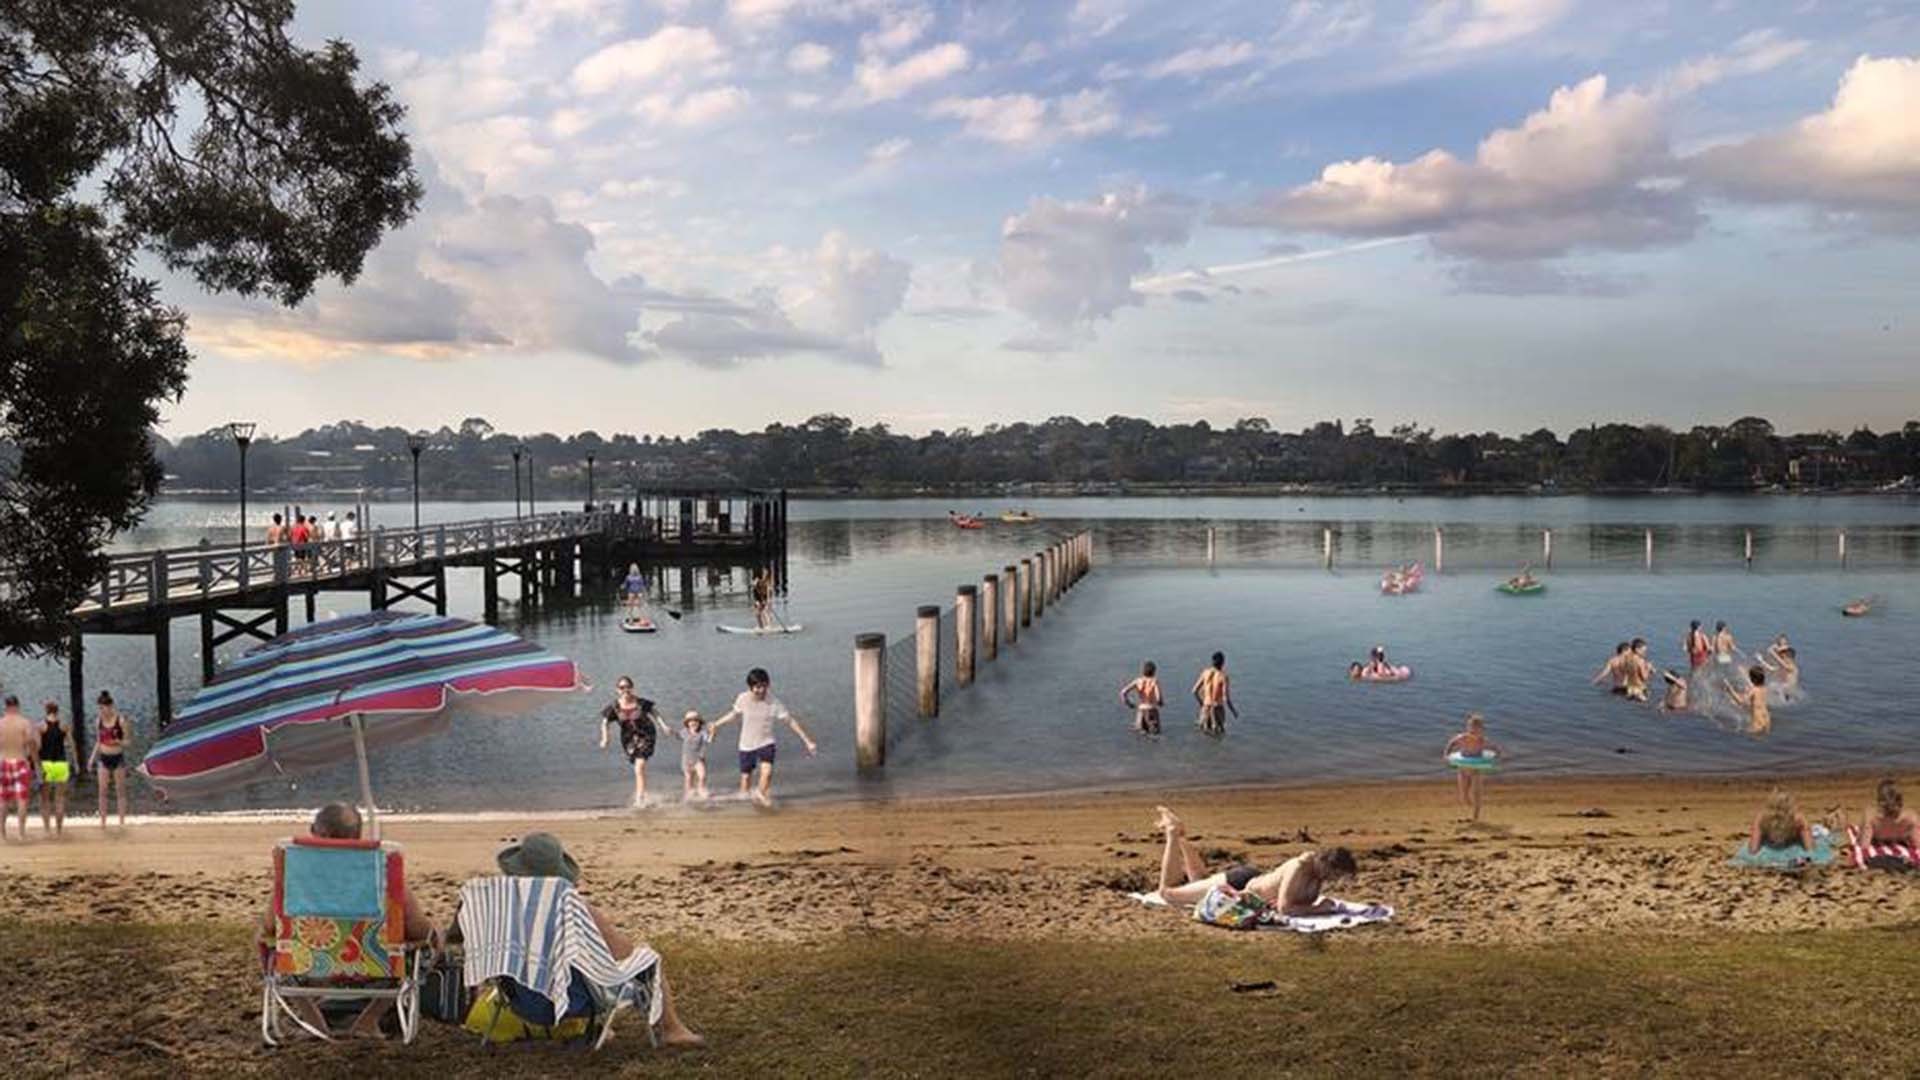 A New Swimming Spot Is Slated to Open Along the Parramatta River in 2021